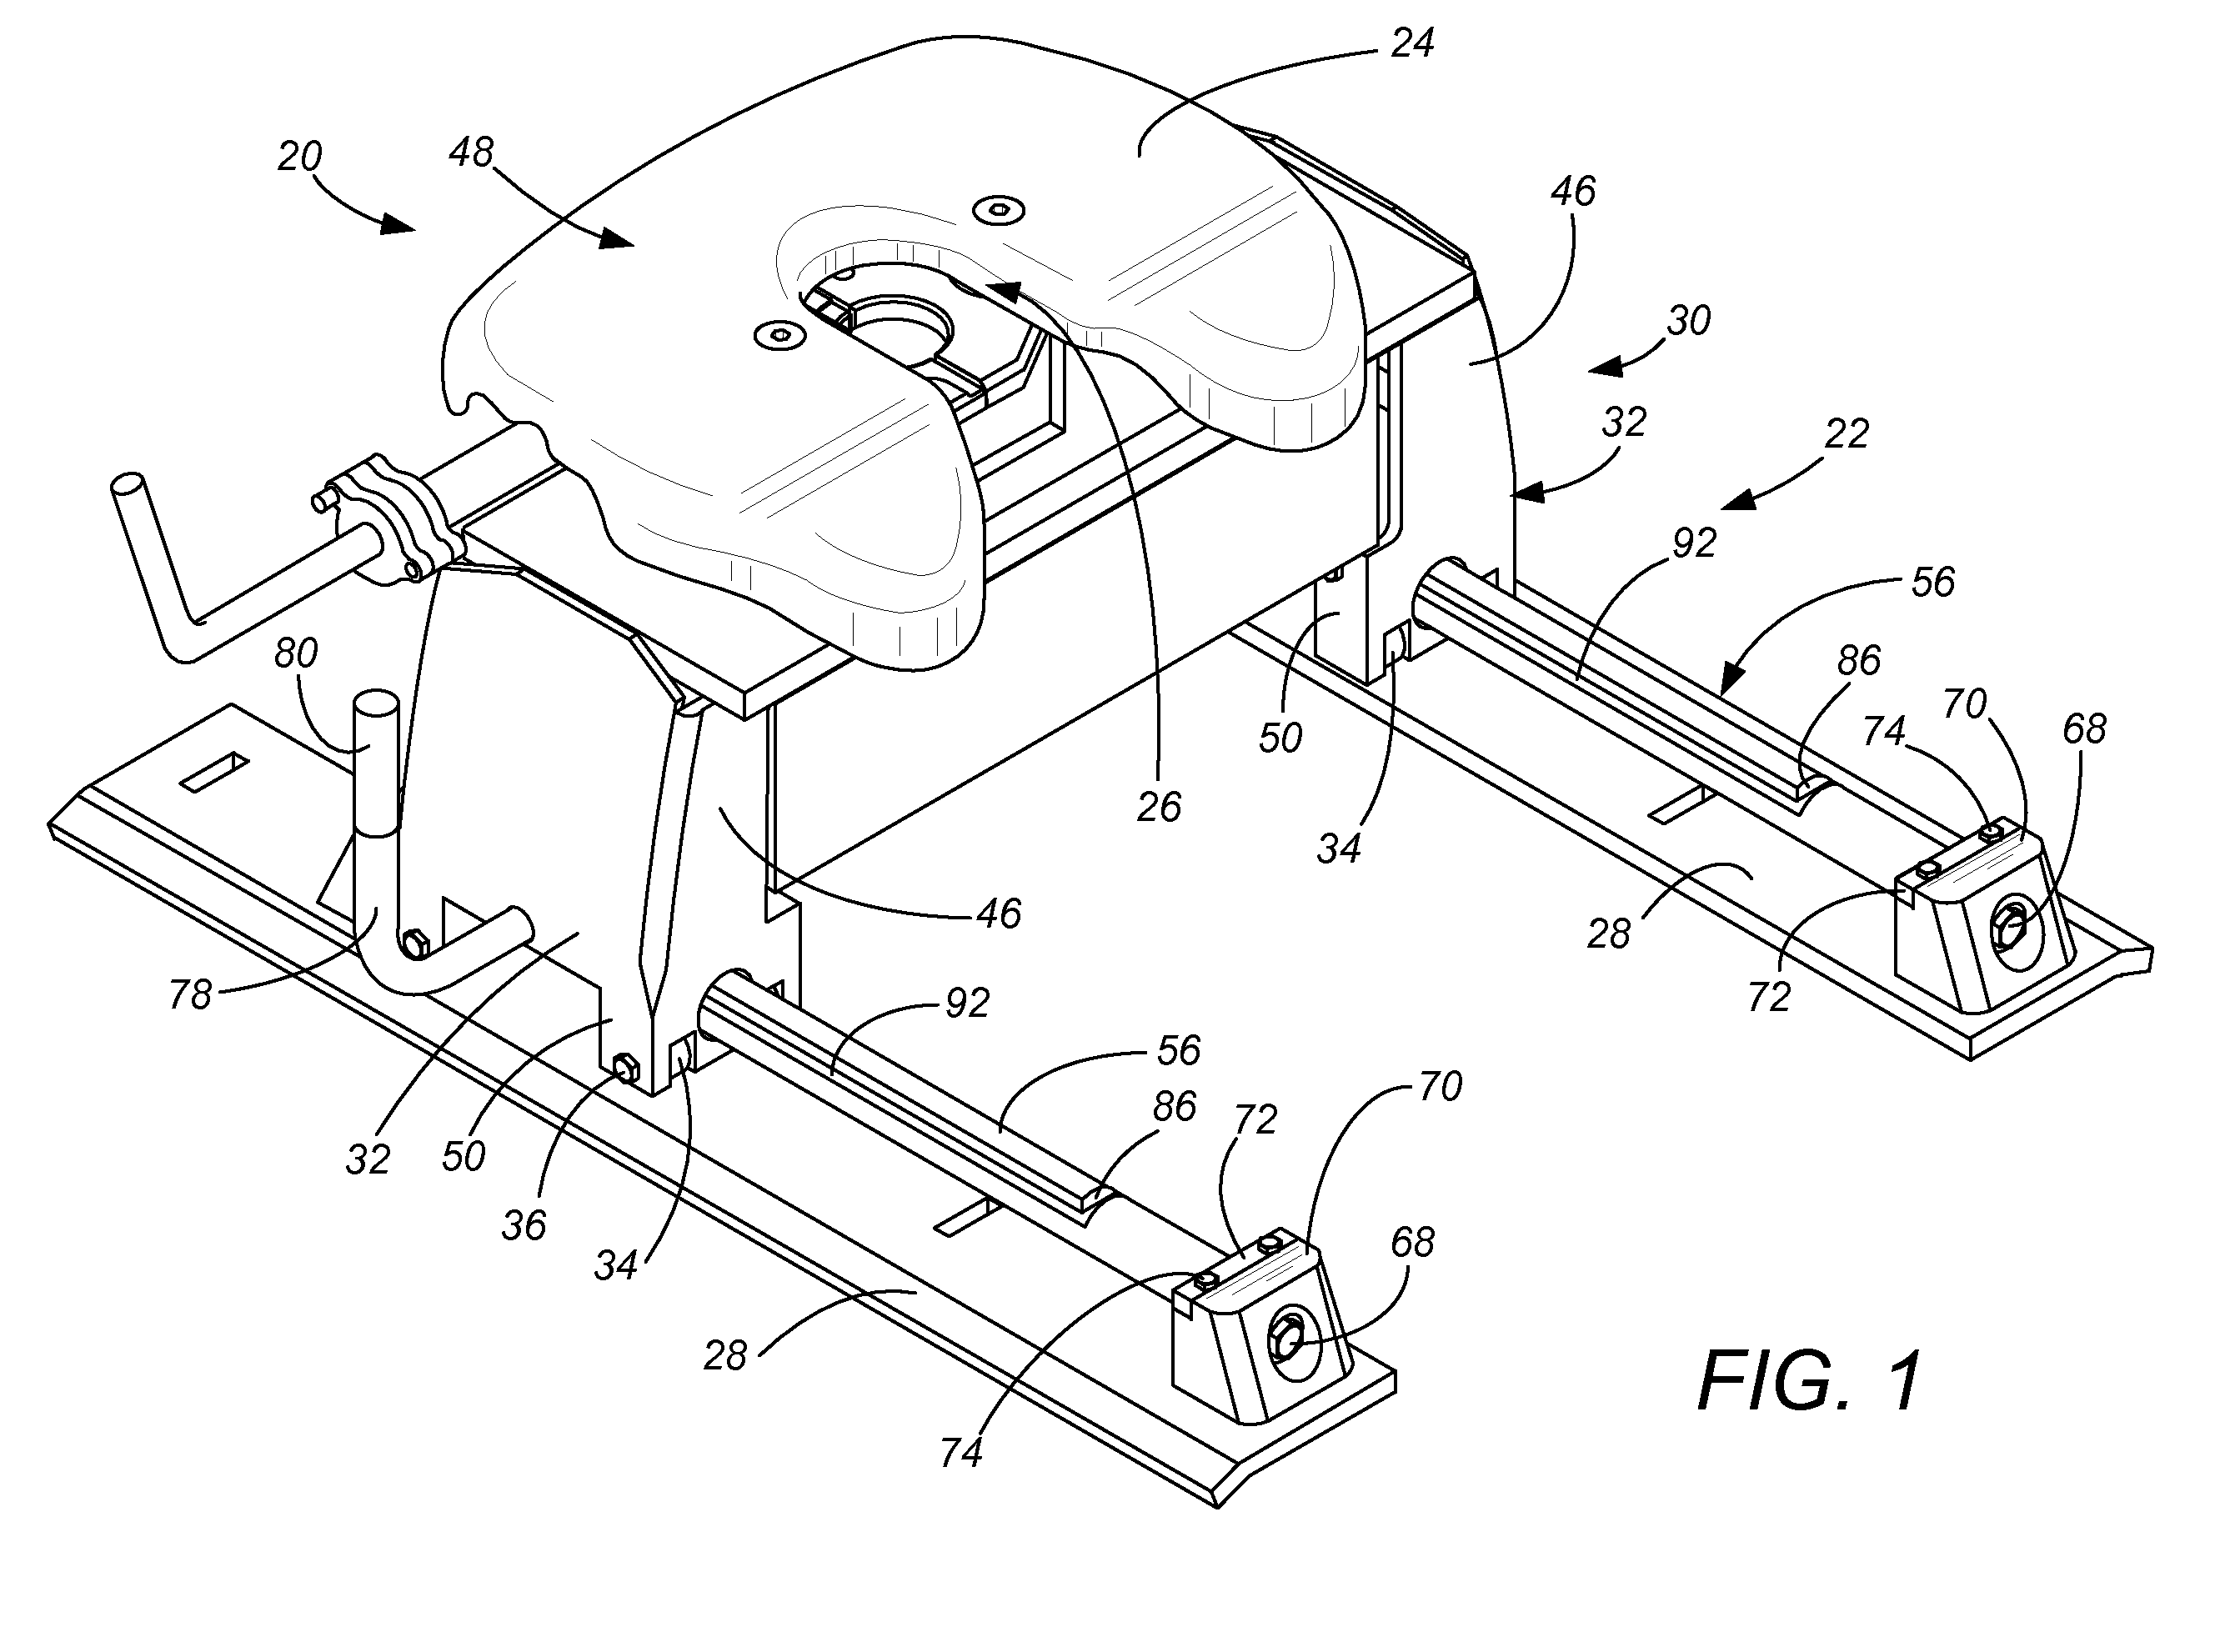 Moveable hitch with stress-free elevated bearing guide